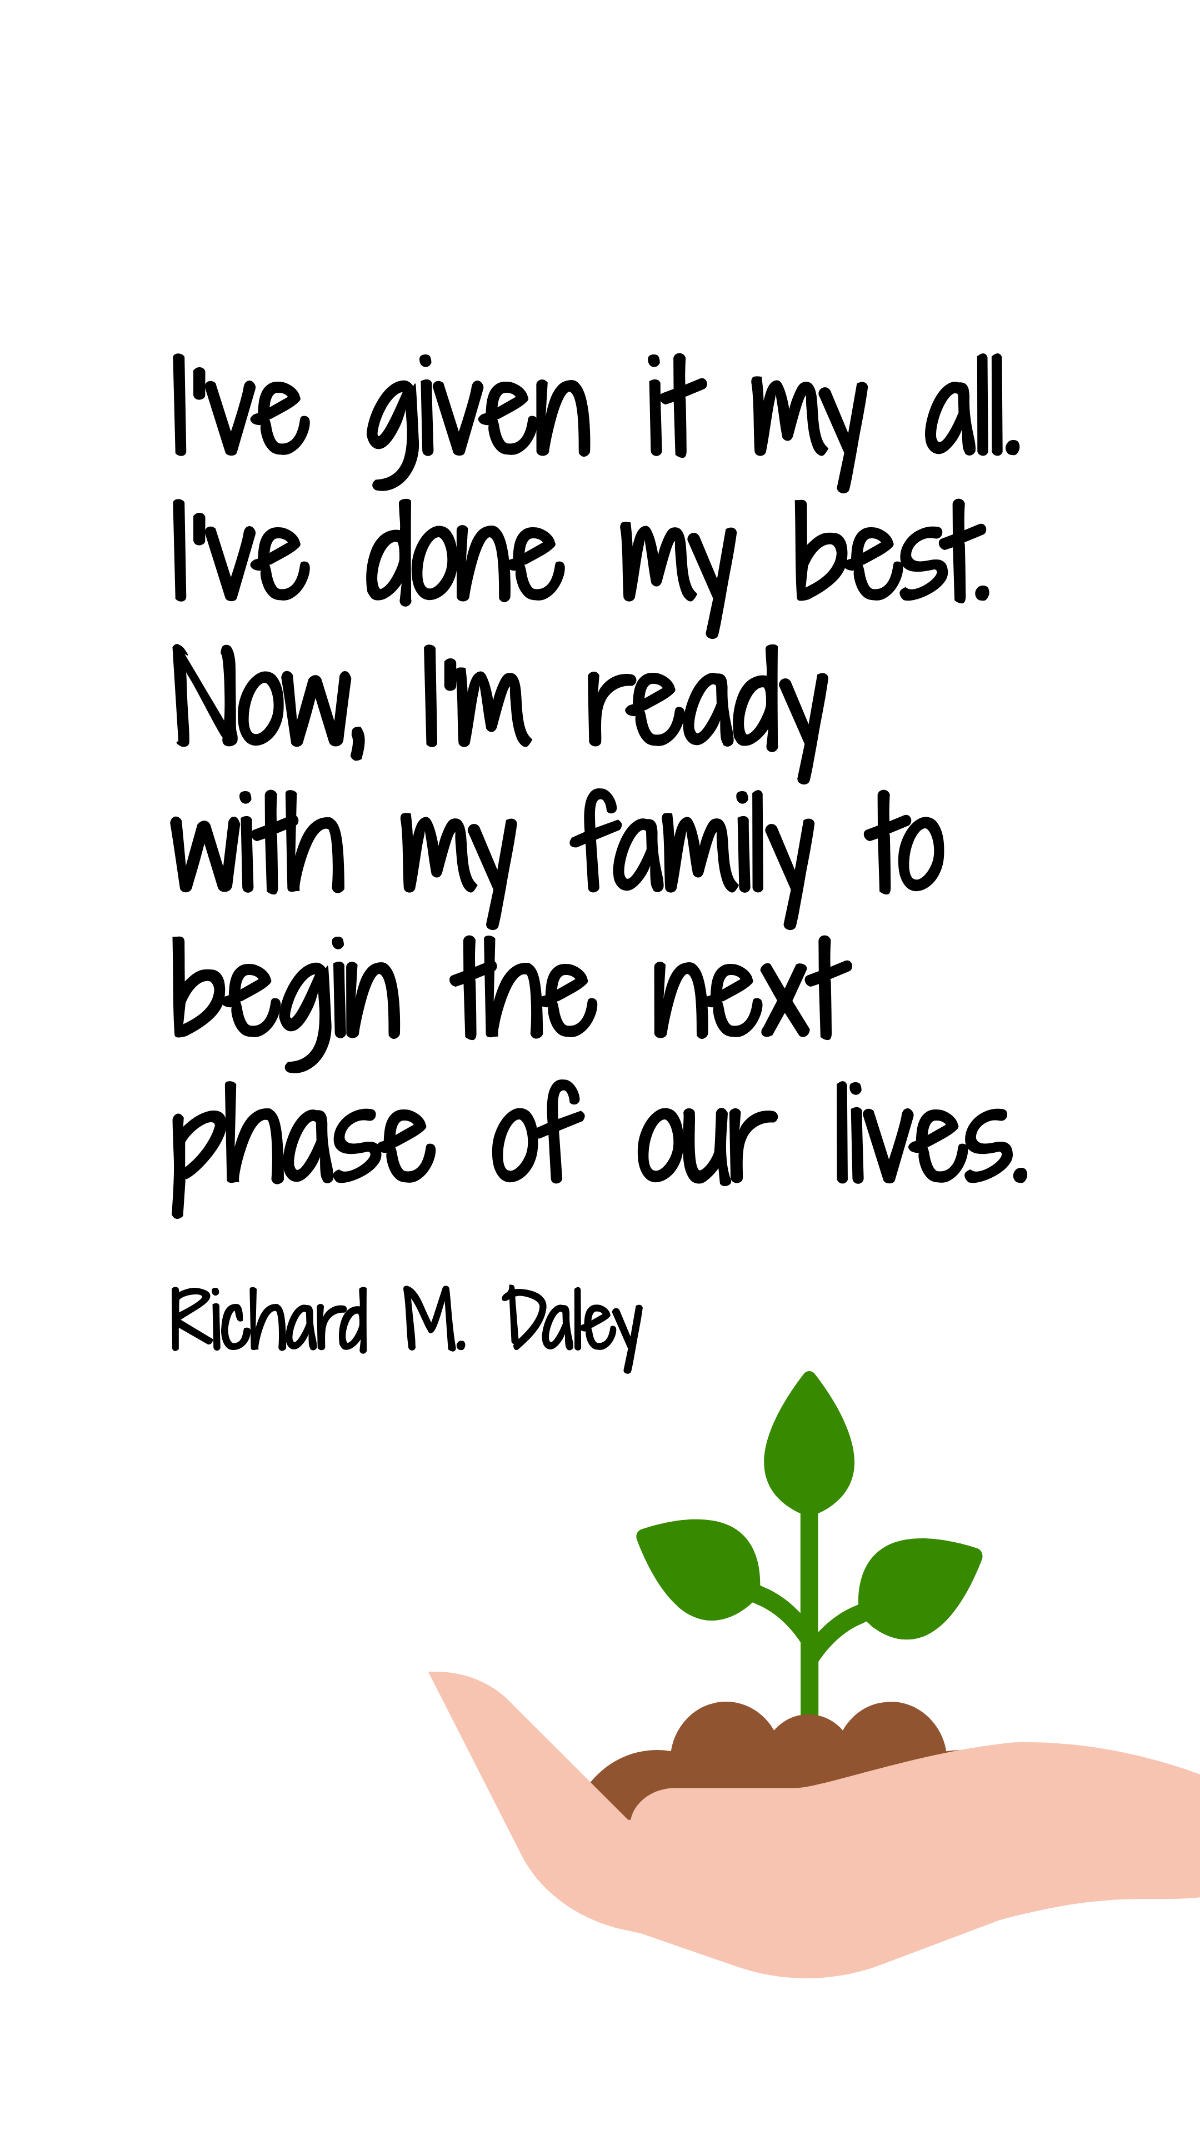 Richard M. Daley - I've given it my all. I've done my best. Now, I'm ready with my family to begin the next phase of our lives.